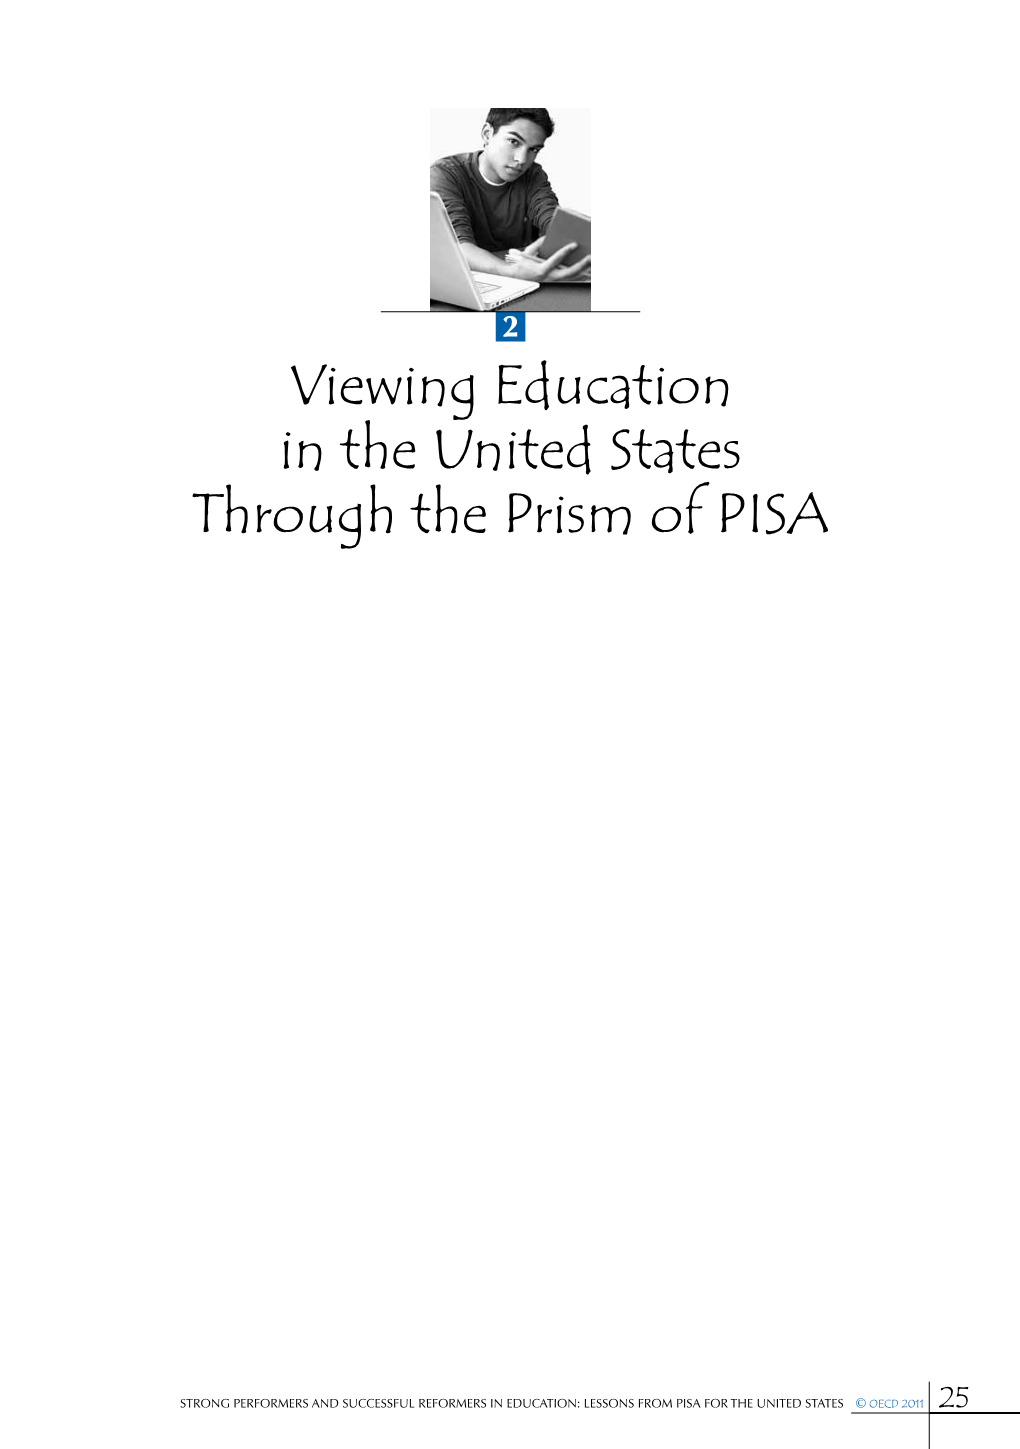 Viewing Education in the United States Through the Prism of PISA